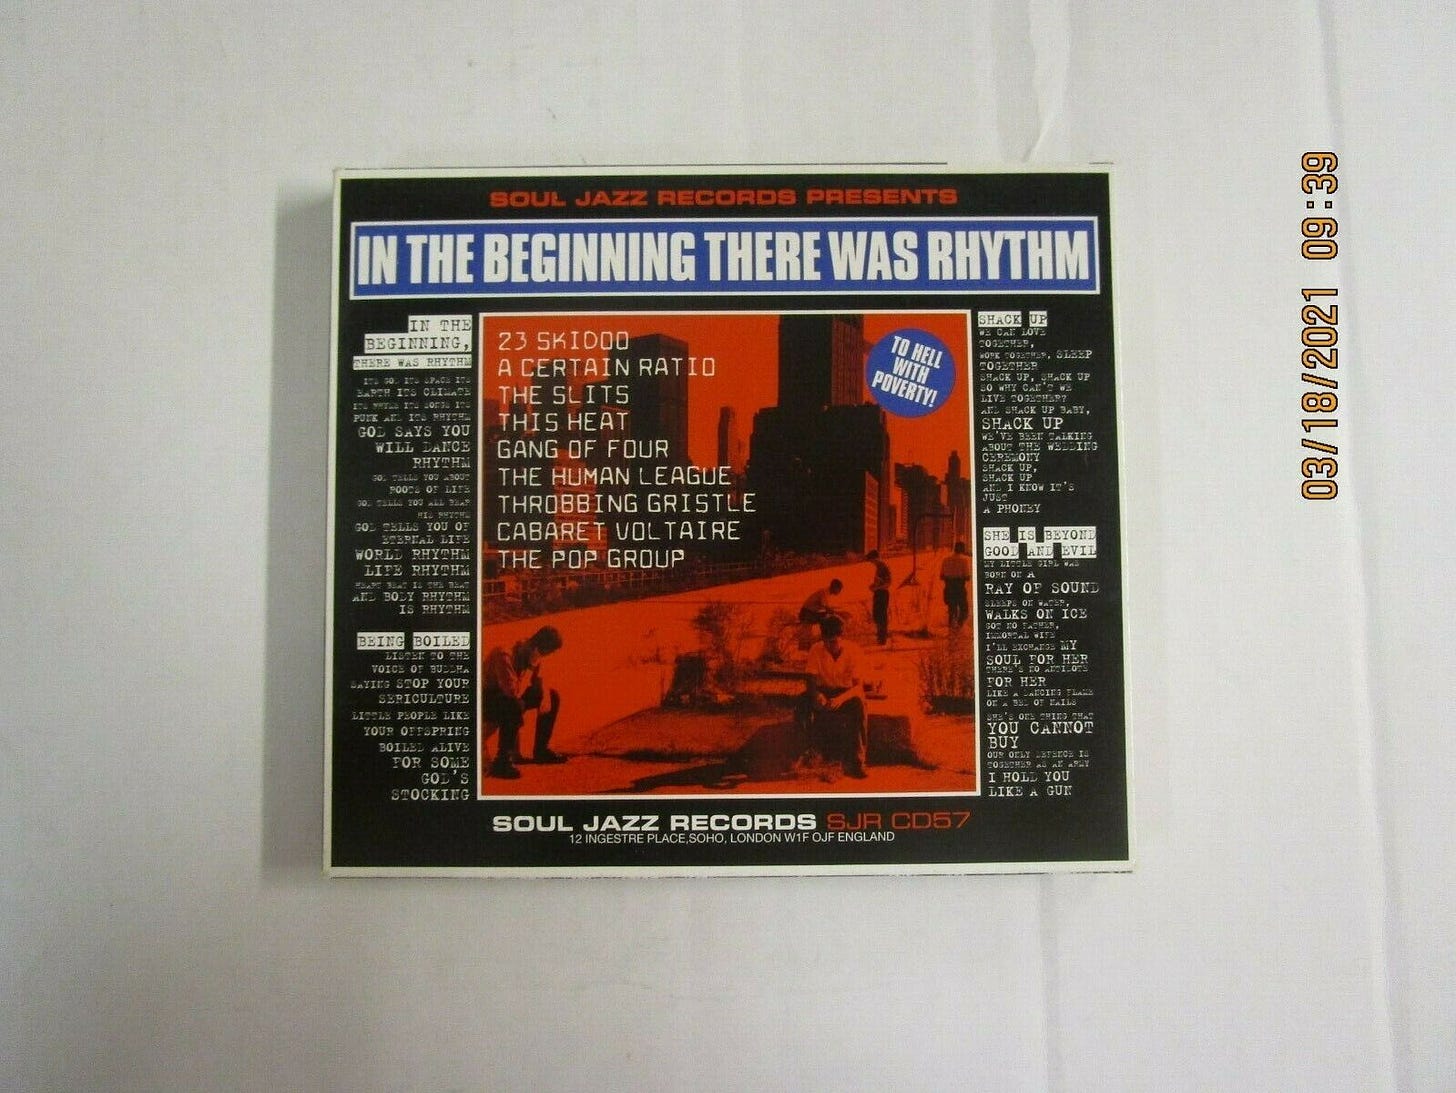 Image 1 - IN THE BEGINNING THERE WAS RHYTHM CD Used! 2001 Soul Jazz GANG OF FOUR THIS HEAT